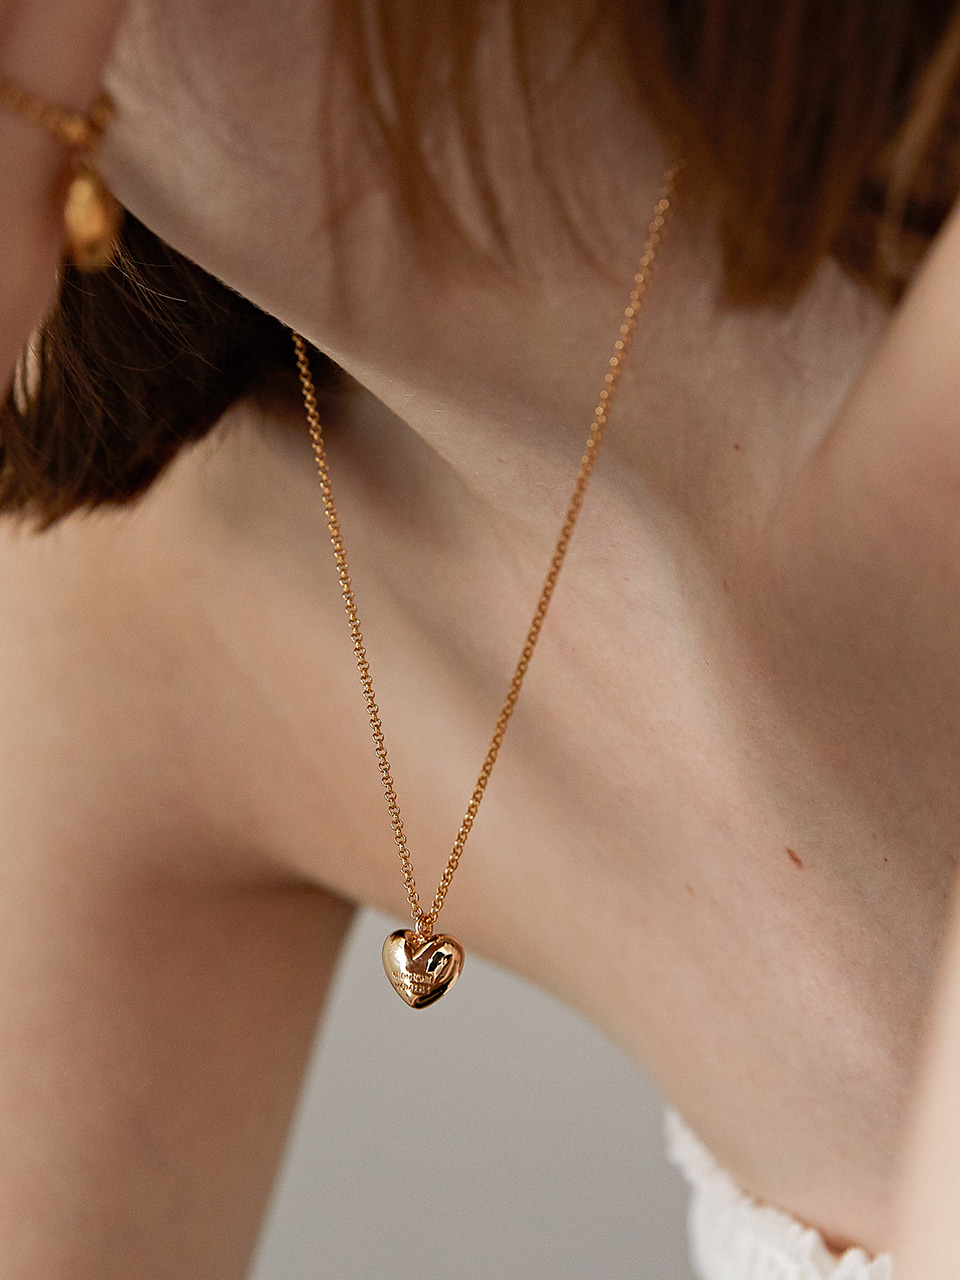 Lovable necklace - gold